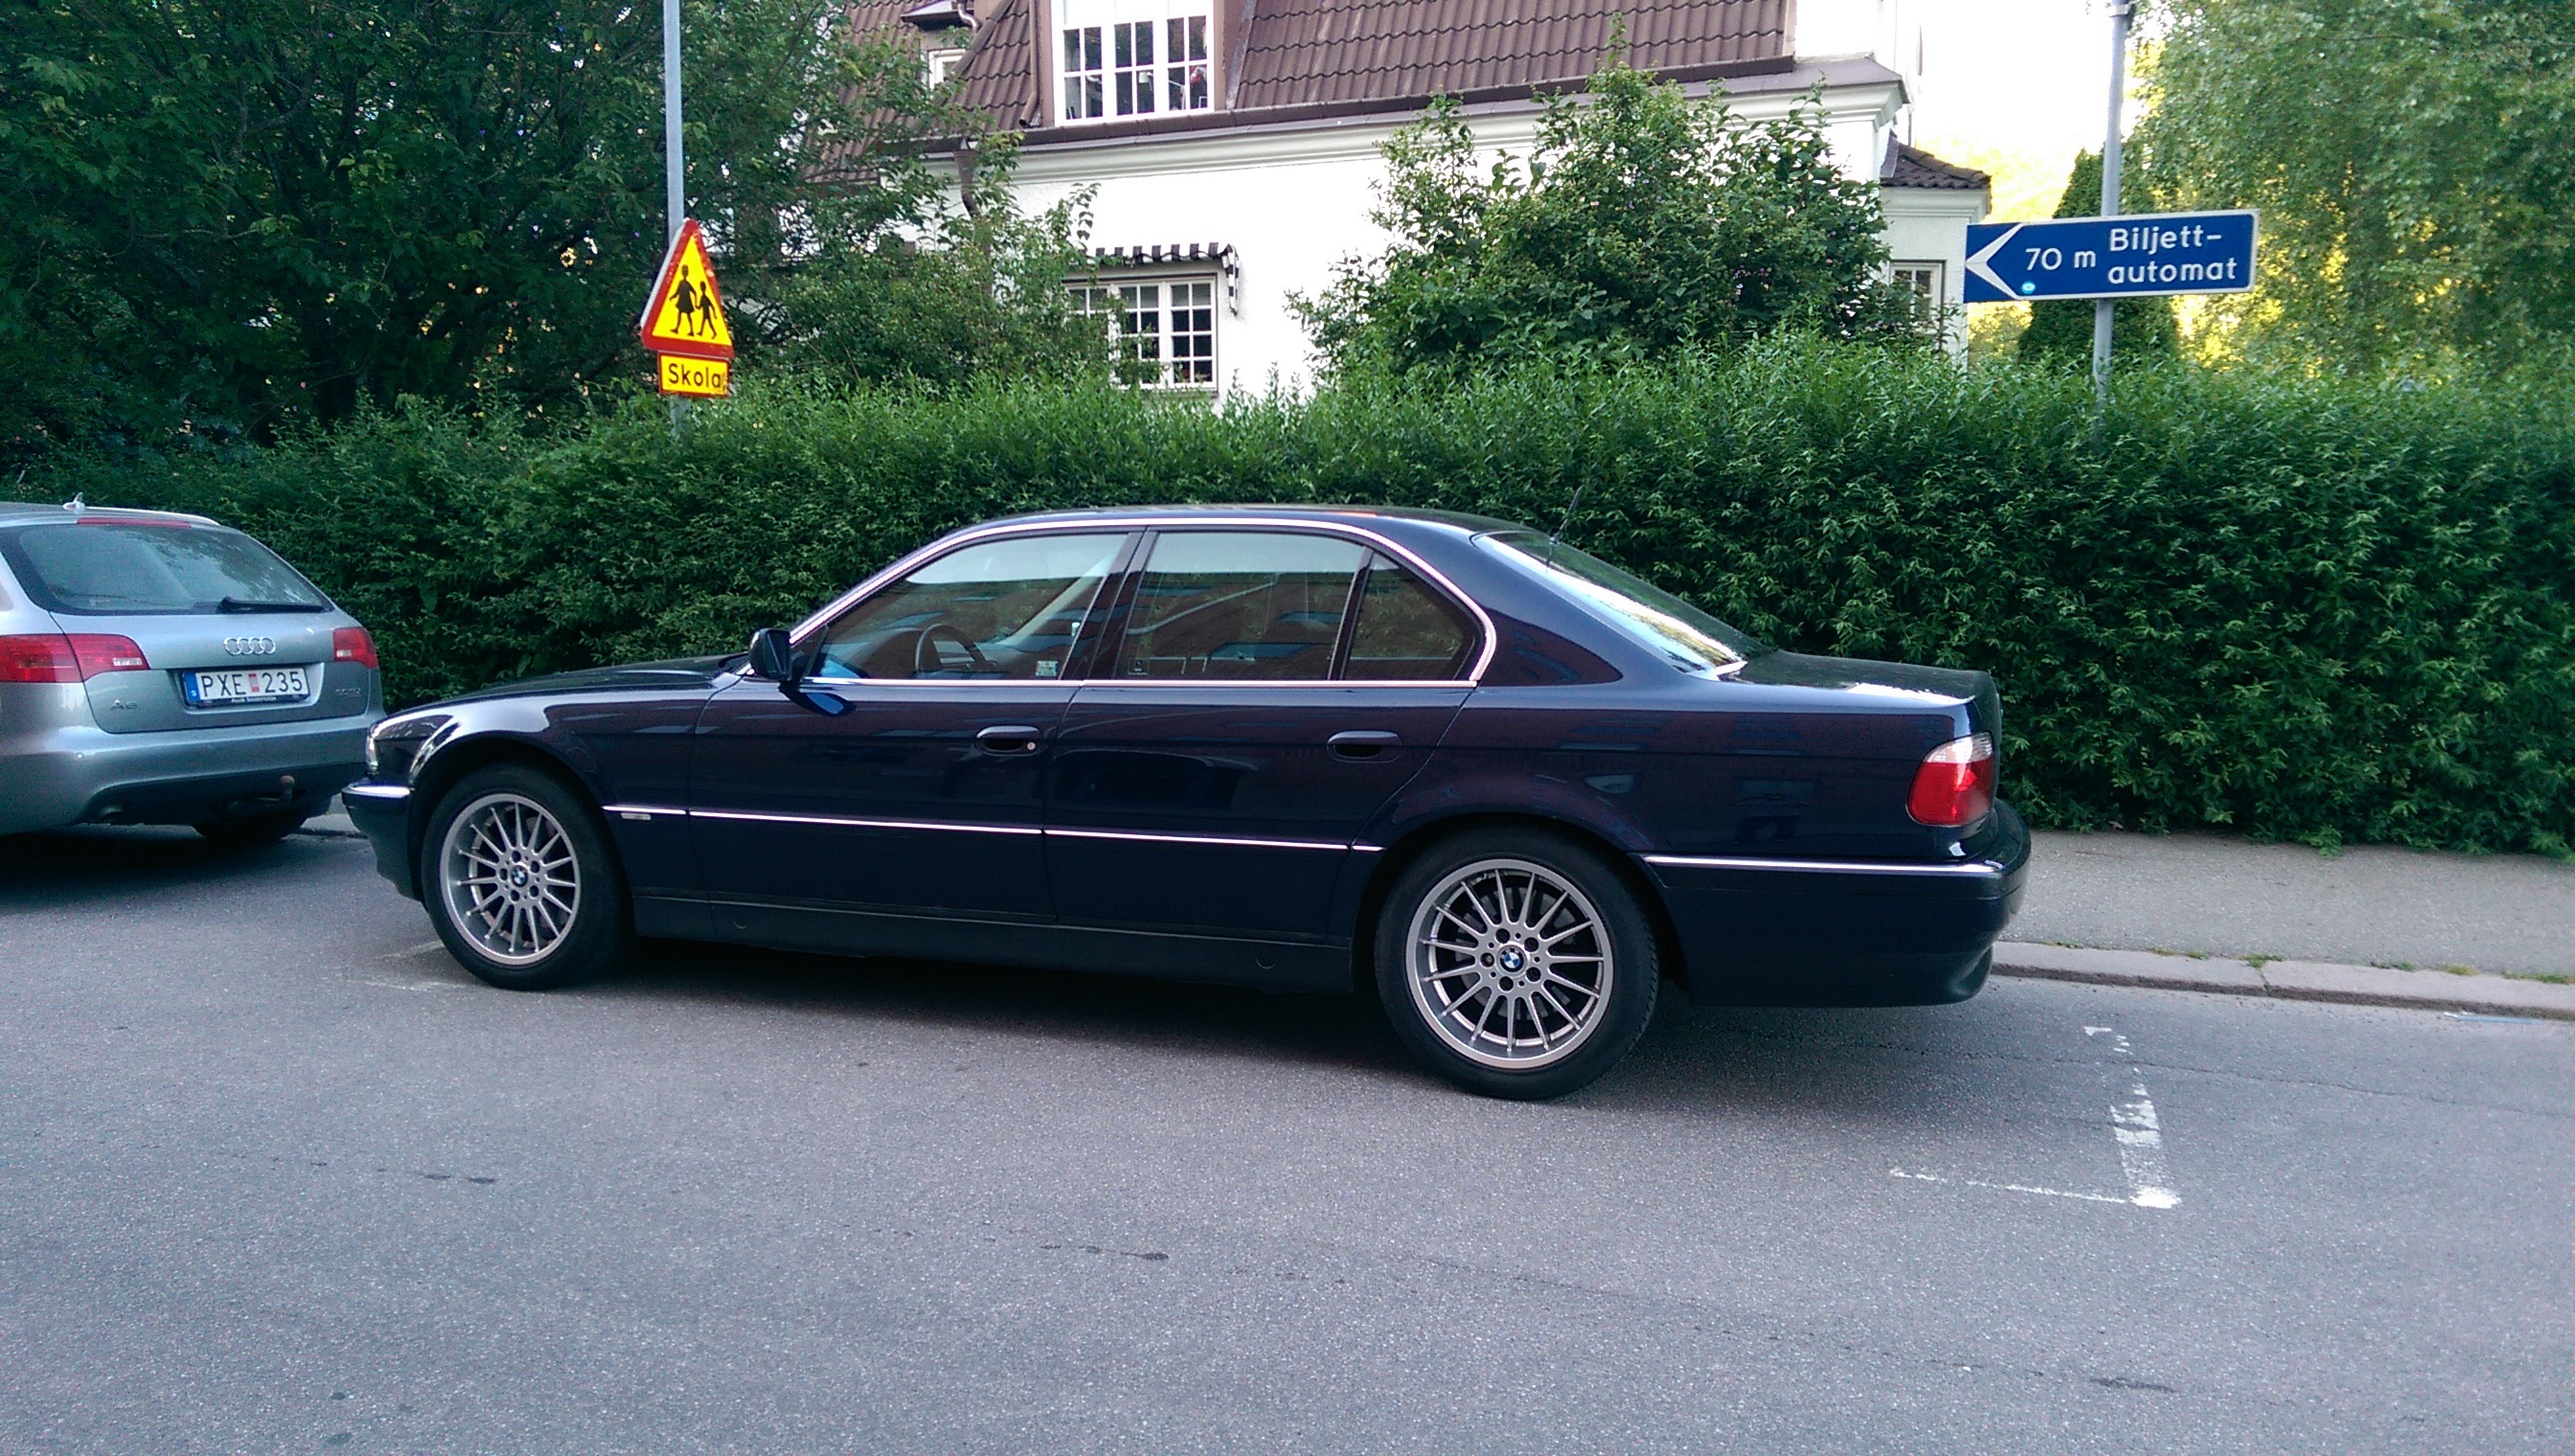 Search for the perfect E38 - 728i or 740? - Unicorn options? - Page 2 - BMW General - PistonHeads